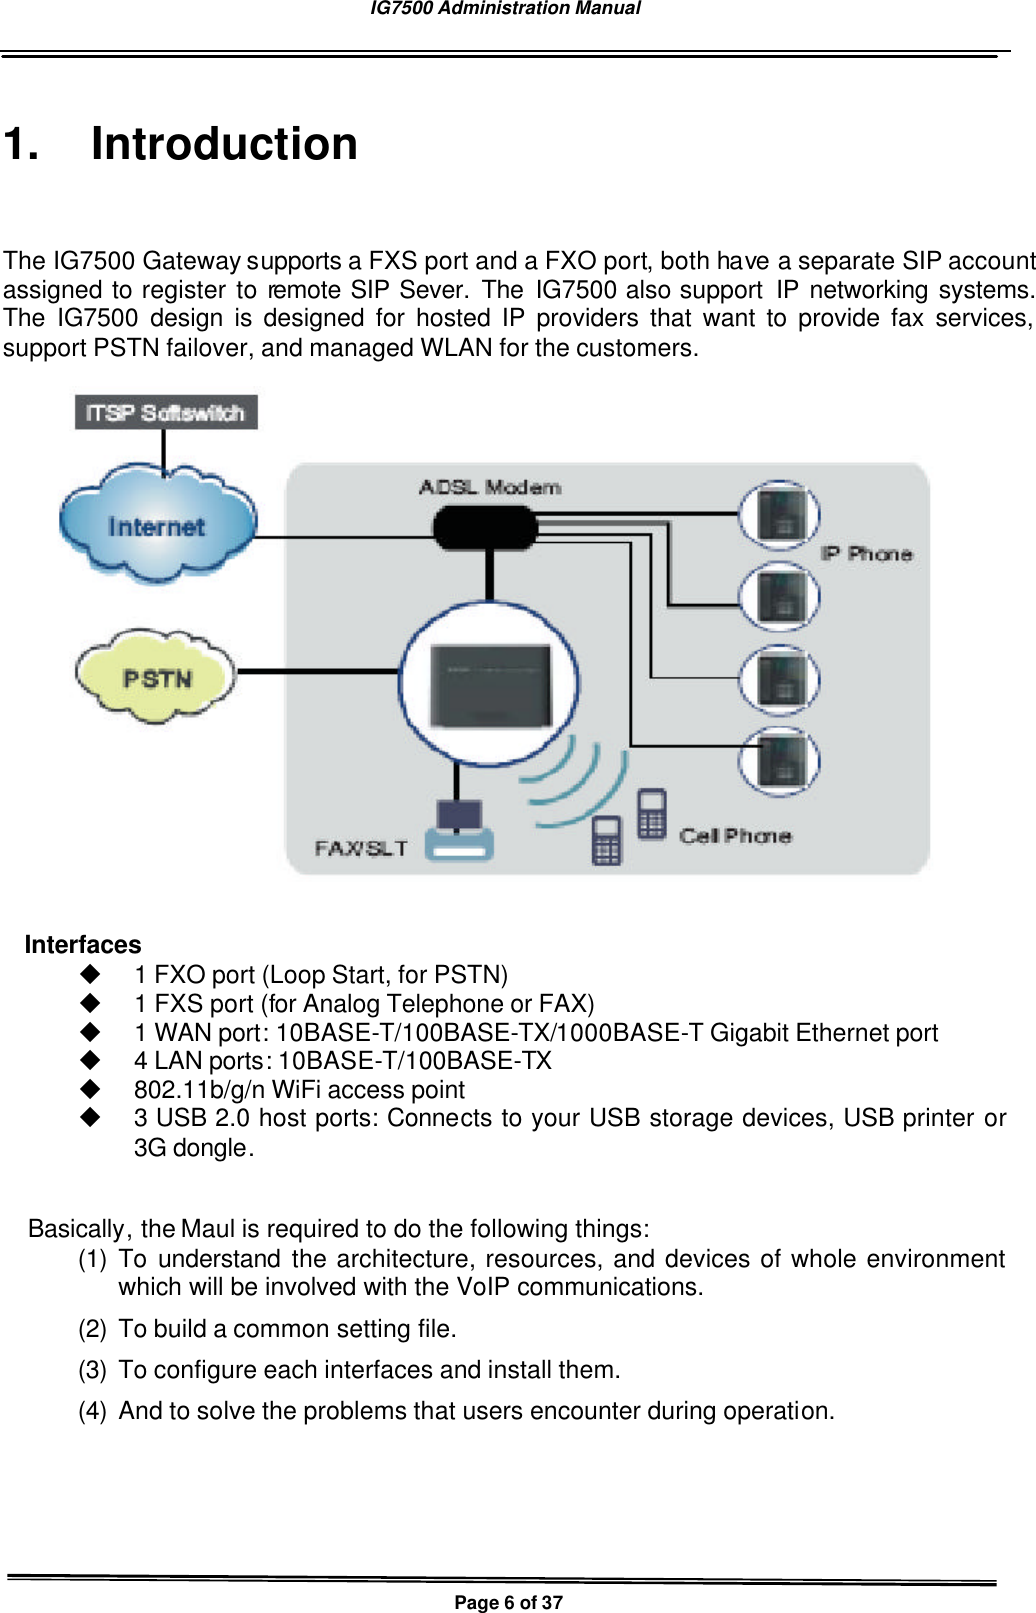 IG7500 Administration Manual   Page 6 of 37  1. Introduction The IG7500 Gateway supports a FXS port and a FXO port, both have a separate SIP account assigned to register to remote SIP Sever. The IG7500 also support  IP networking systems. The IG7500 design is designed for hosted IP providers that want to provide fax services, support PSTN failover, and managed WLAN for the customers.    Interfaces u 1 FXO port (Loop Start, for PSTN) u 1 FXS port (for Analog Telephone or FAX) u 1 WAN port: 10BASE-T/100BASE-TX/1000BASE-T Gigabit Ethernet port u 4 LAN ports: 10BASE-T/100BASE-TX u 802.11b/g/n WiFi access point u 3 USB 2.0 host ports: Connects to your USB storage devices, USB printer or 3G dongle.  Basically, the Maul is required to do the following things: (1) To understand the architecture, resources, and devices of whole environment which will be involved with the VoIP communications. (2) To build a common setting file. (3) To configure each interfaces and install them. (4) And to solve the problems that users encounter during operation.  